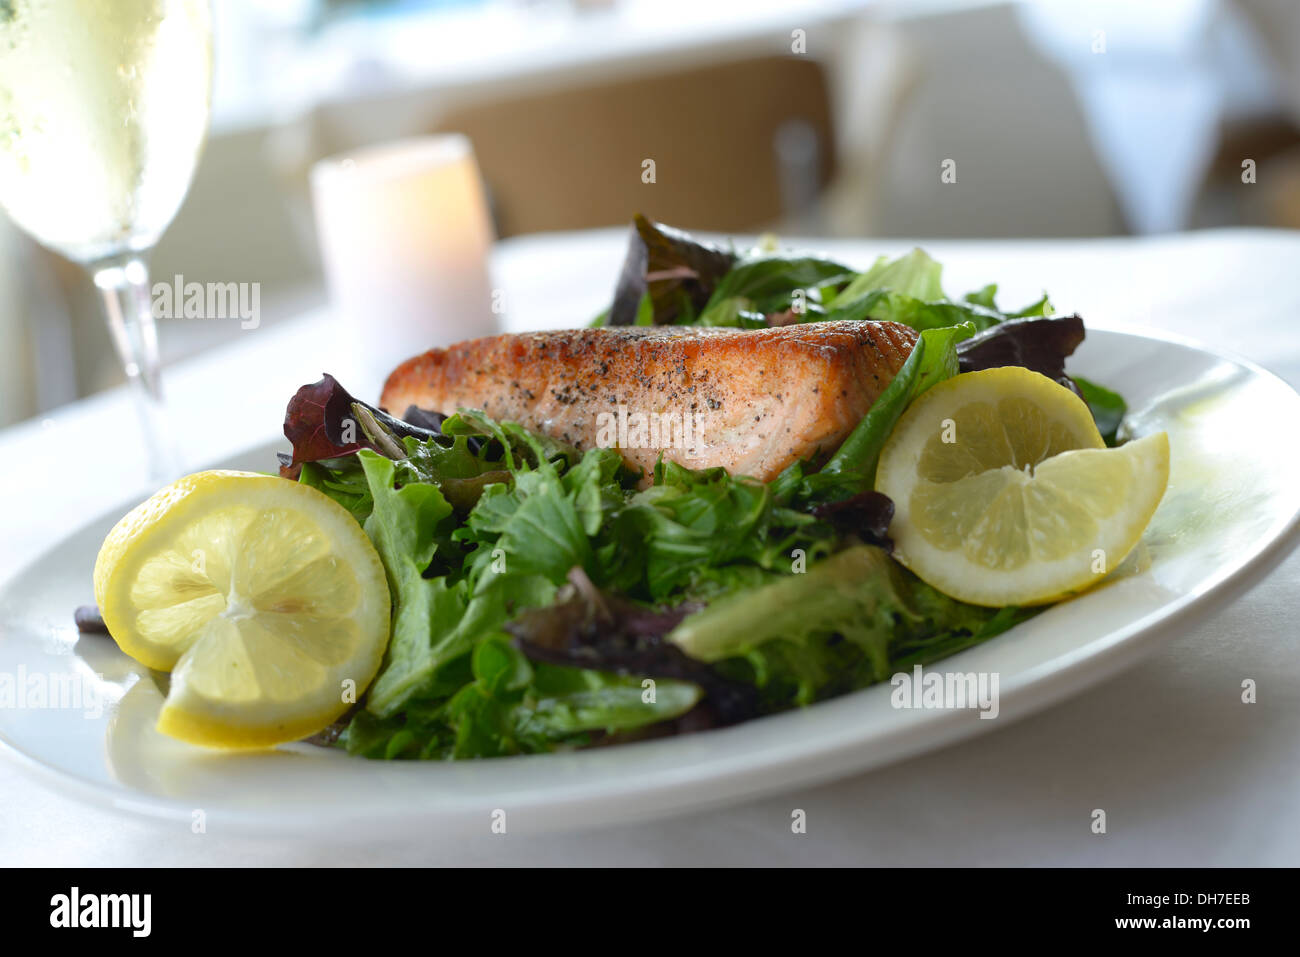 Serving Salmon lunch or dinner, using organic, local and seasonal ingredients. Stock Photo